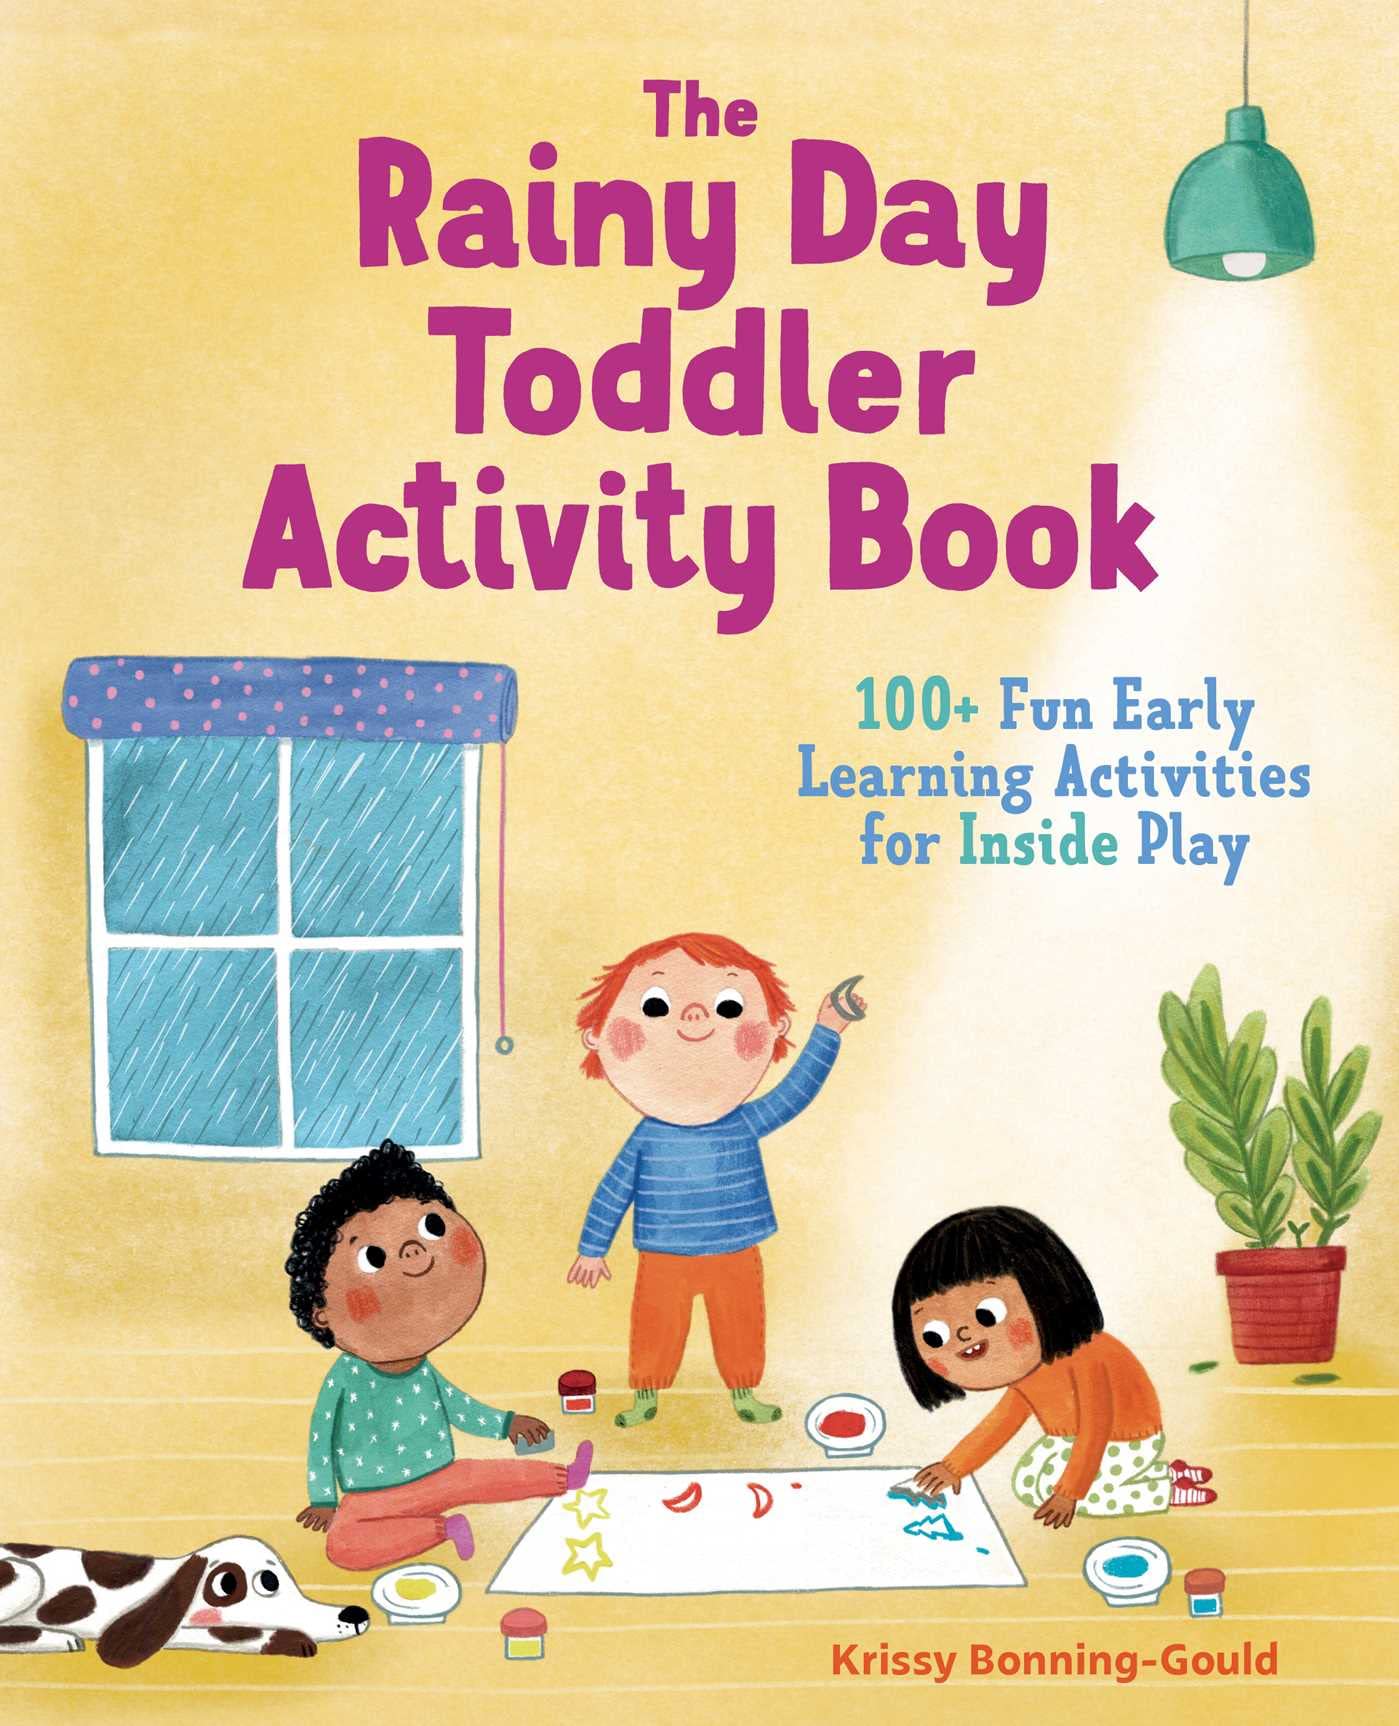 The Rainy Day Toddler Activity Book: 100+ Fun Early Learning Activities for Inside Play (Toddler Activity Books)